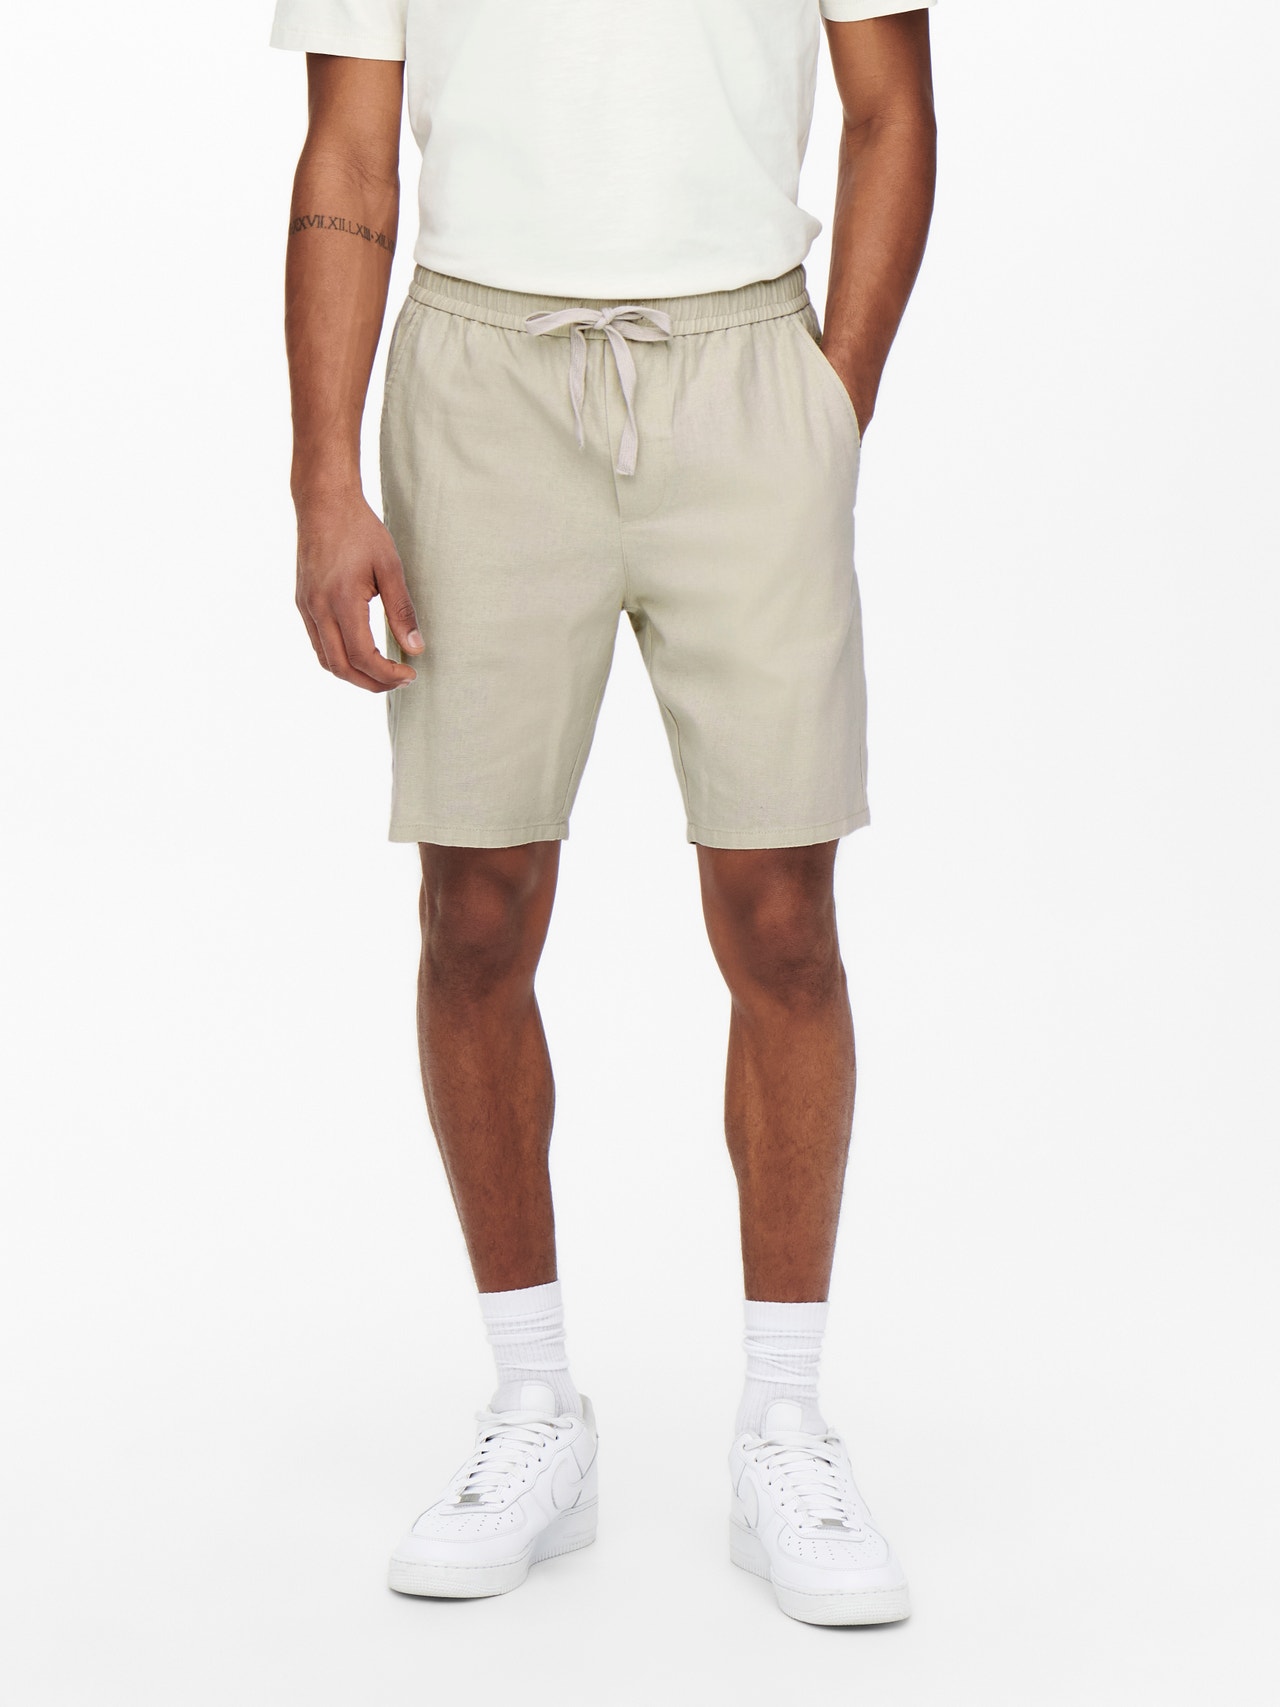 Comfort Fit Mid waist Shorts with 50% discount!